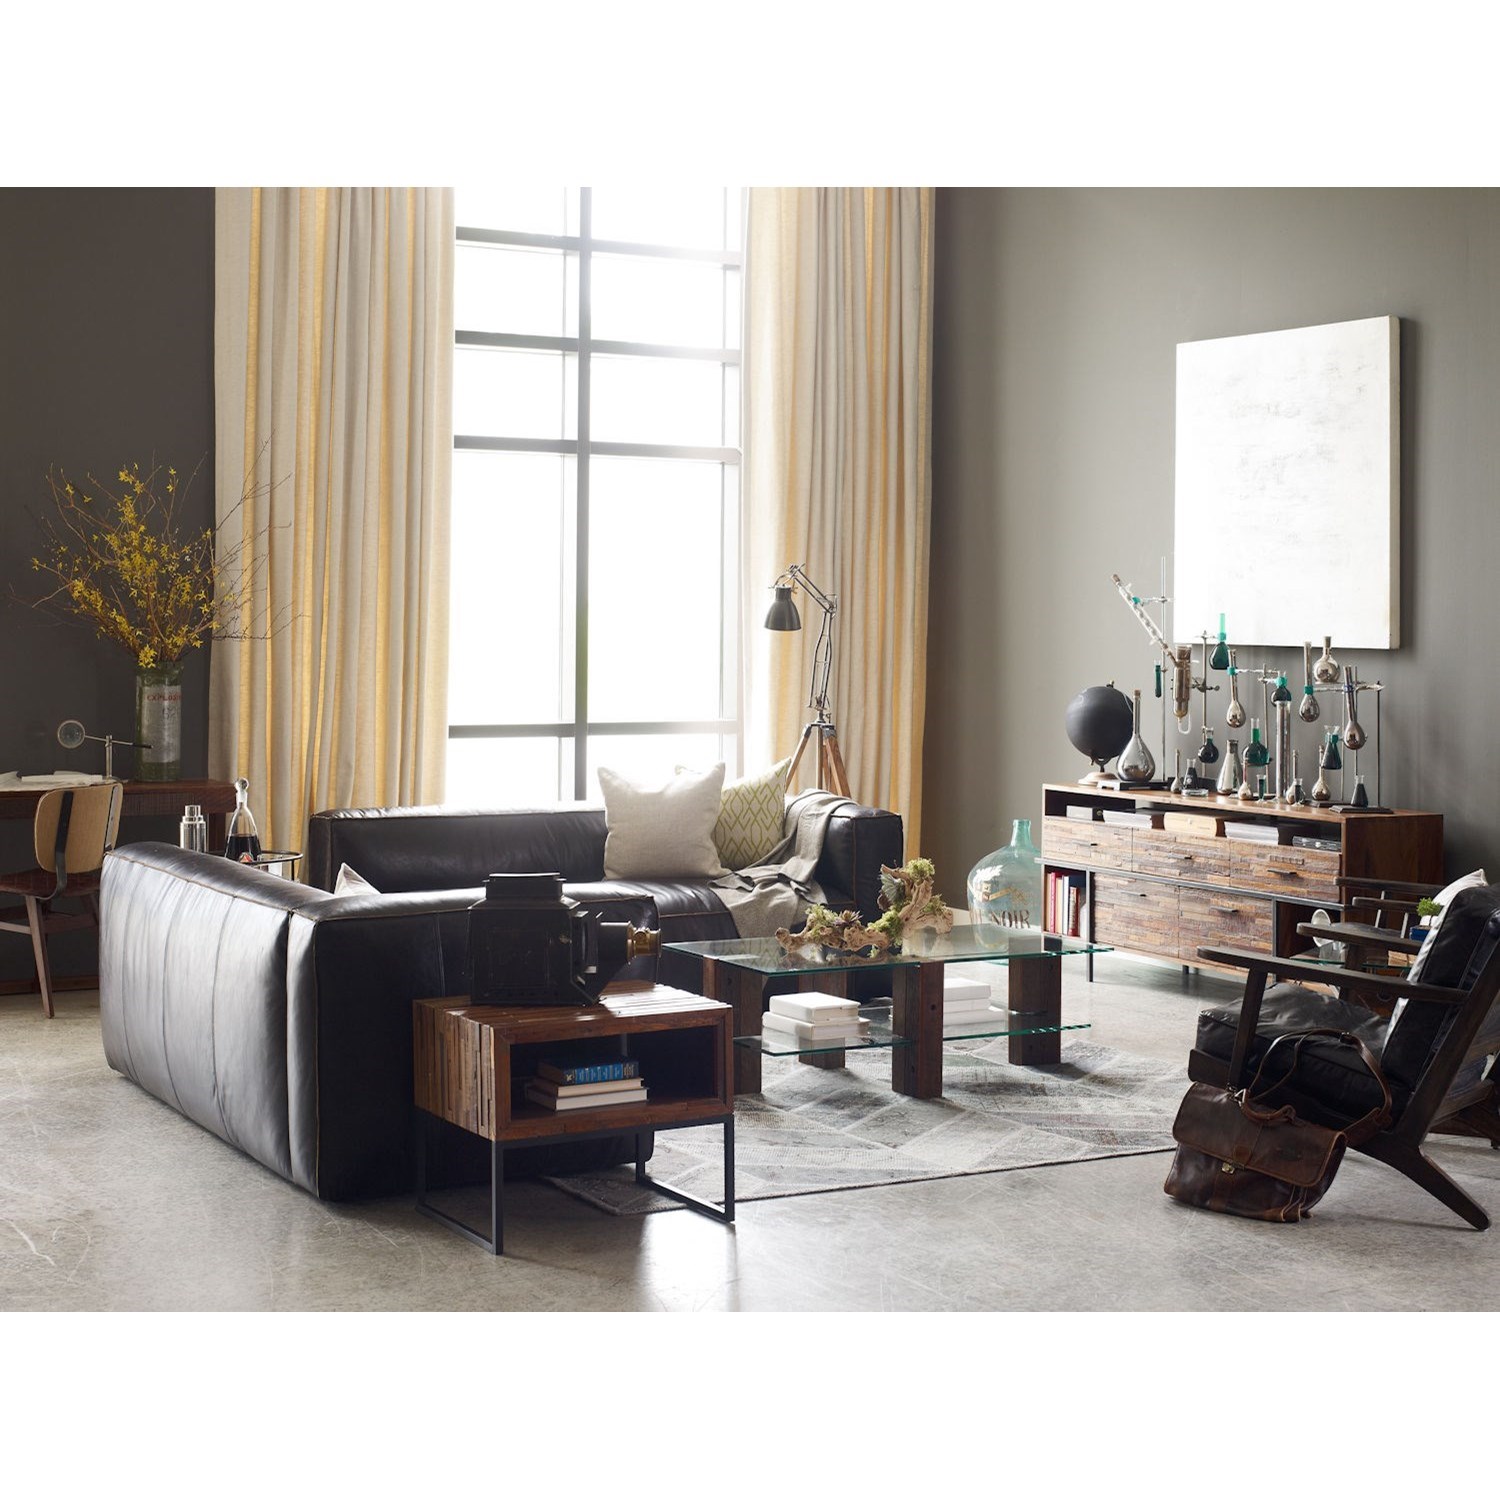 Nolita Sectional RAF and LAF in Old Saddle Black Upholstery